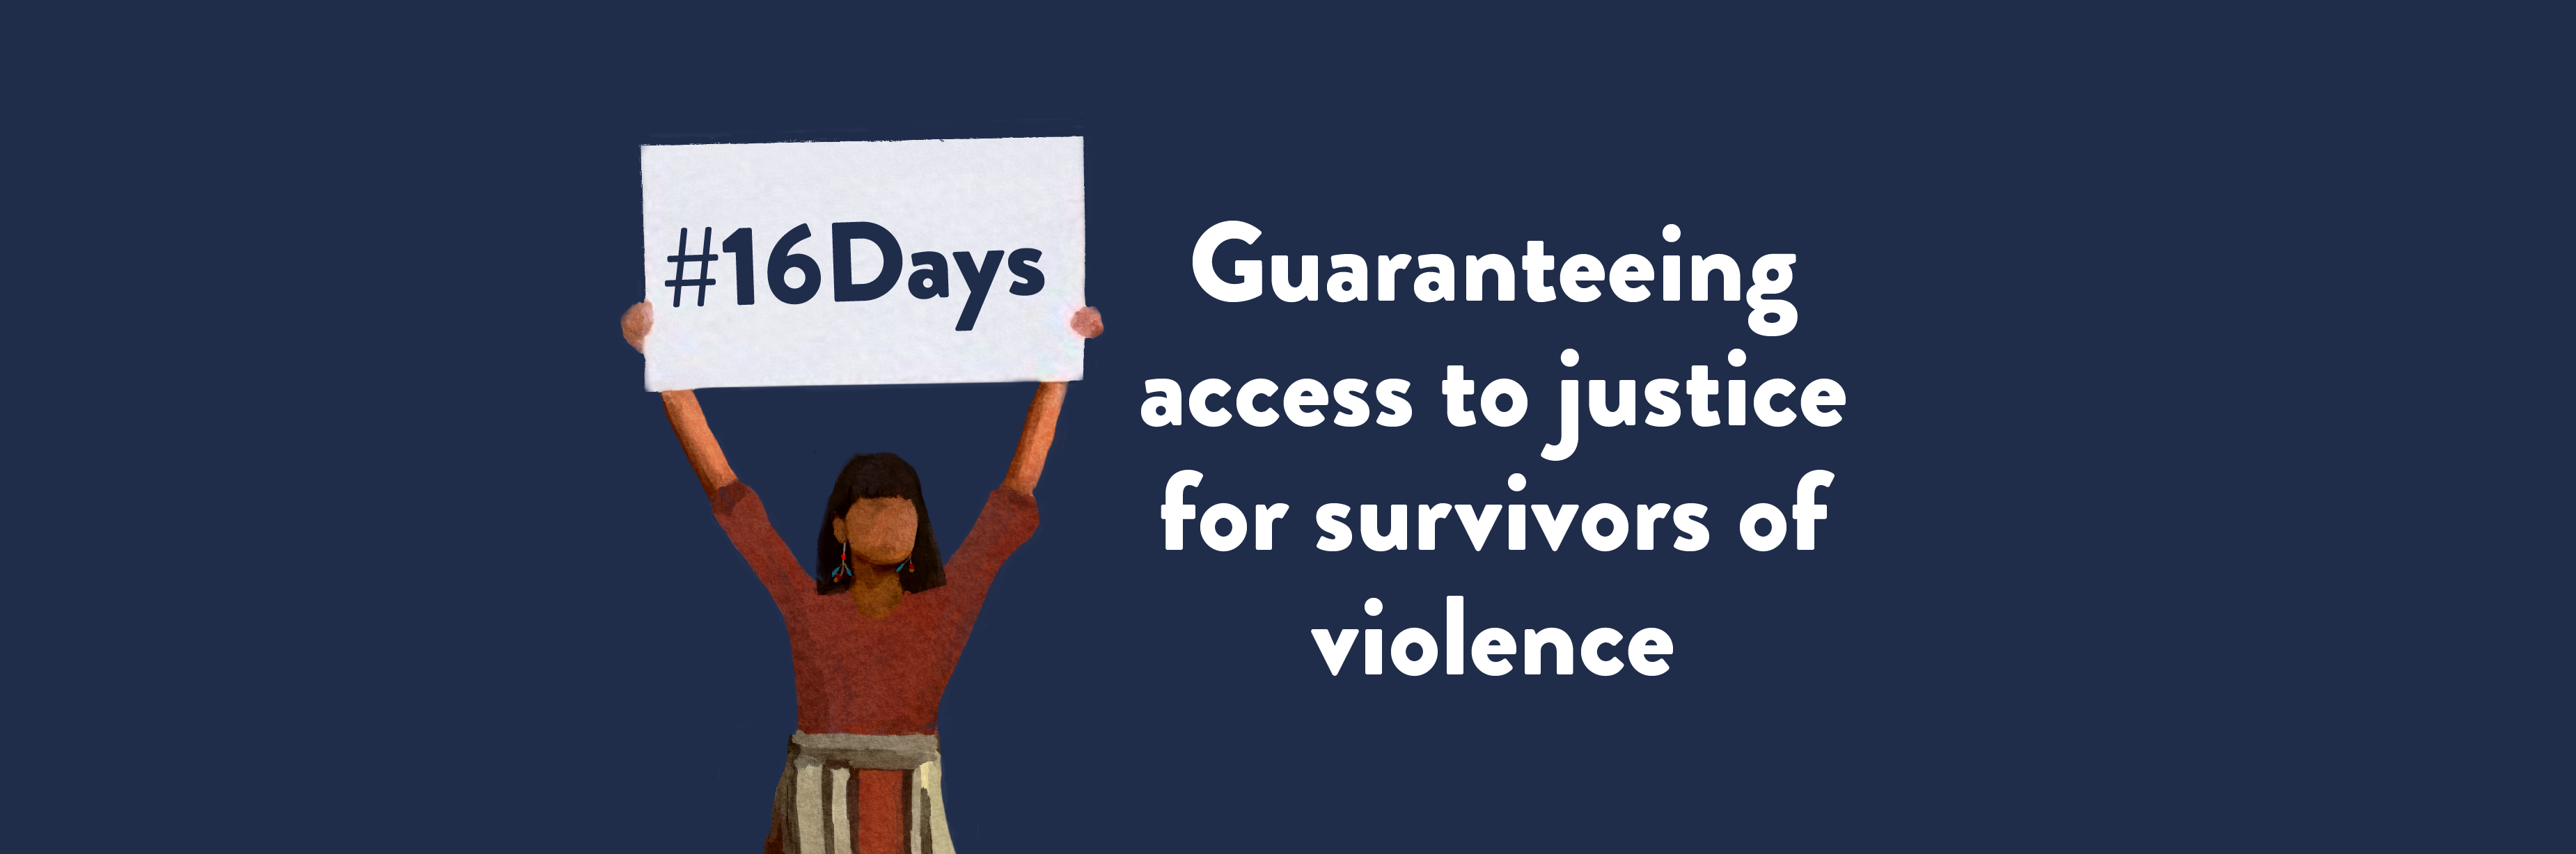 Guaranteeing access to justice for survivors of violence 